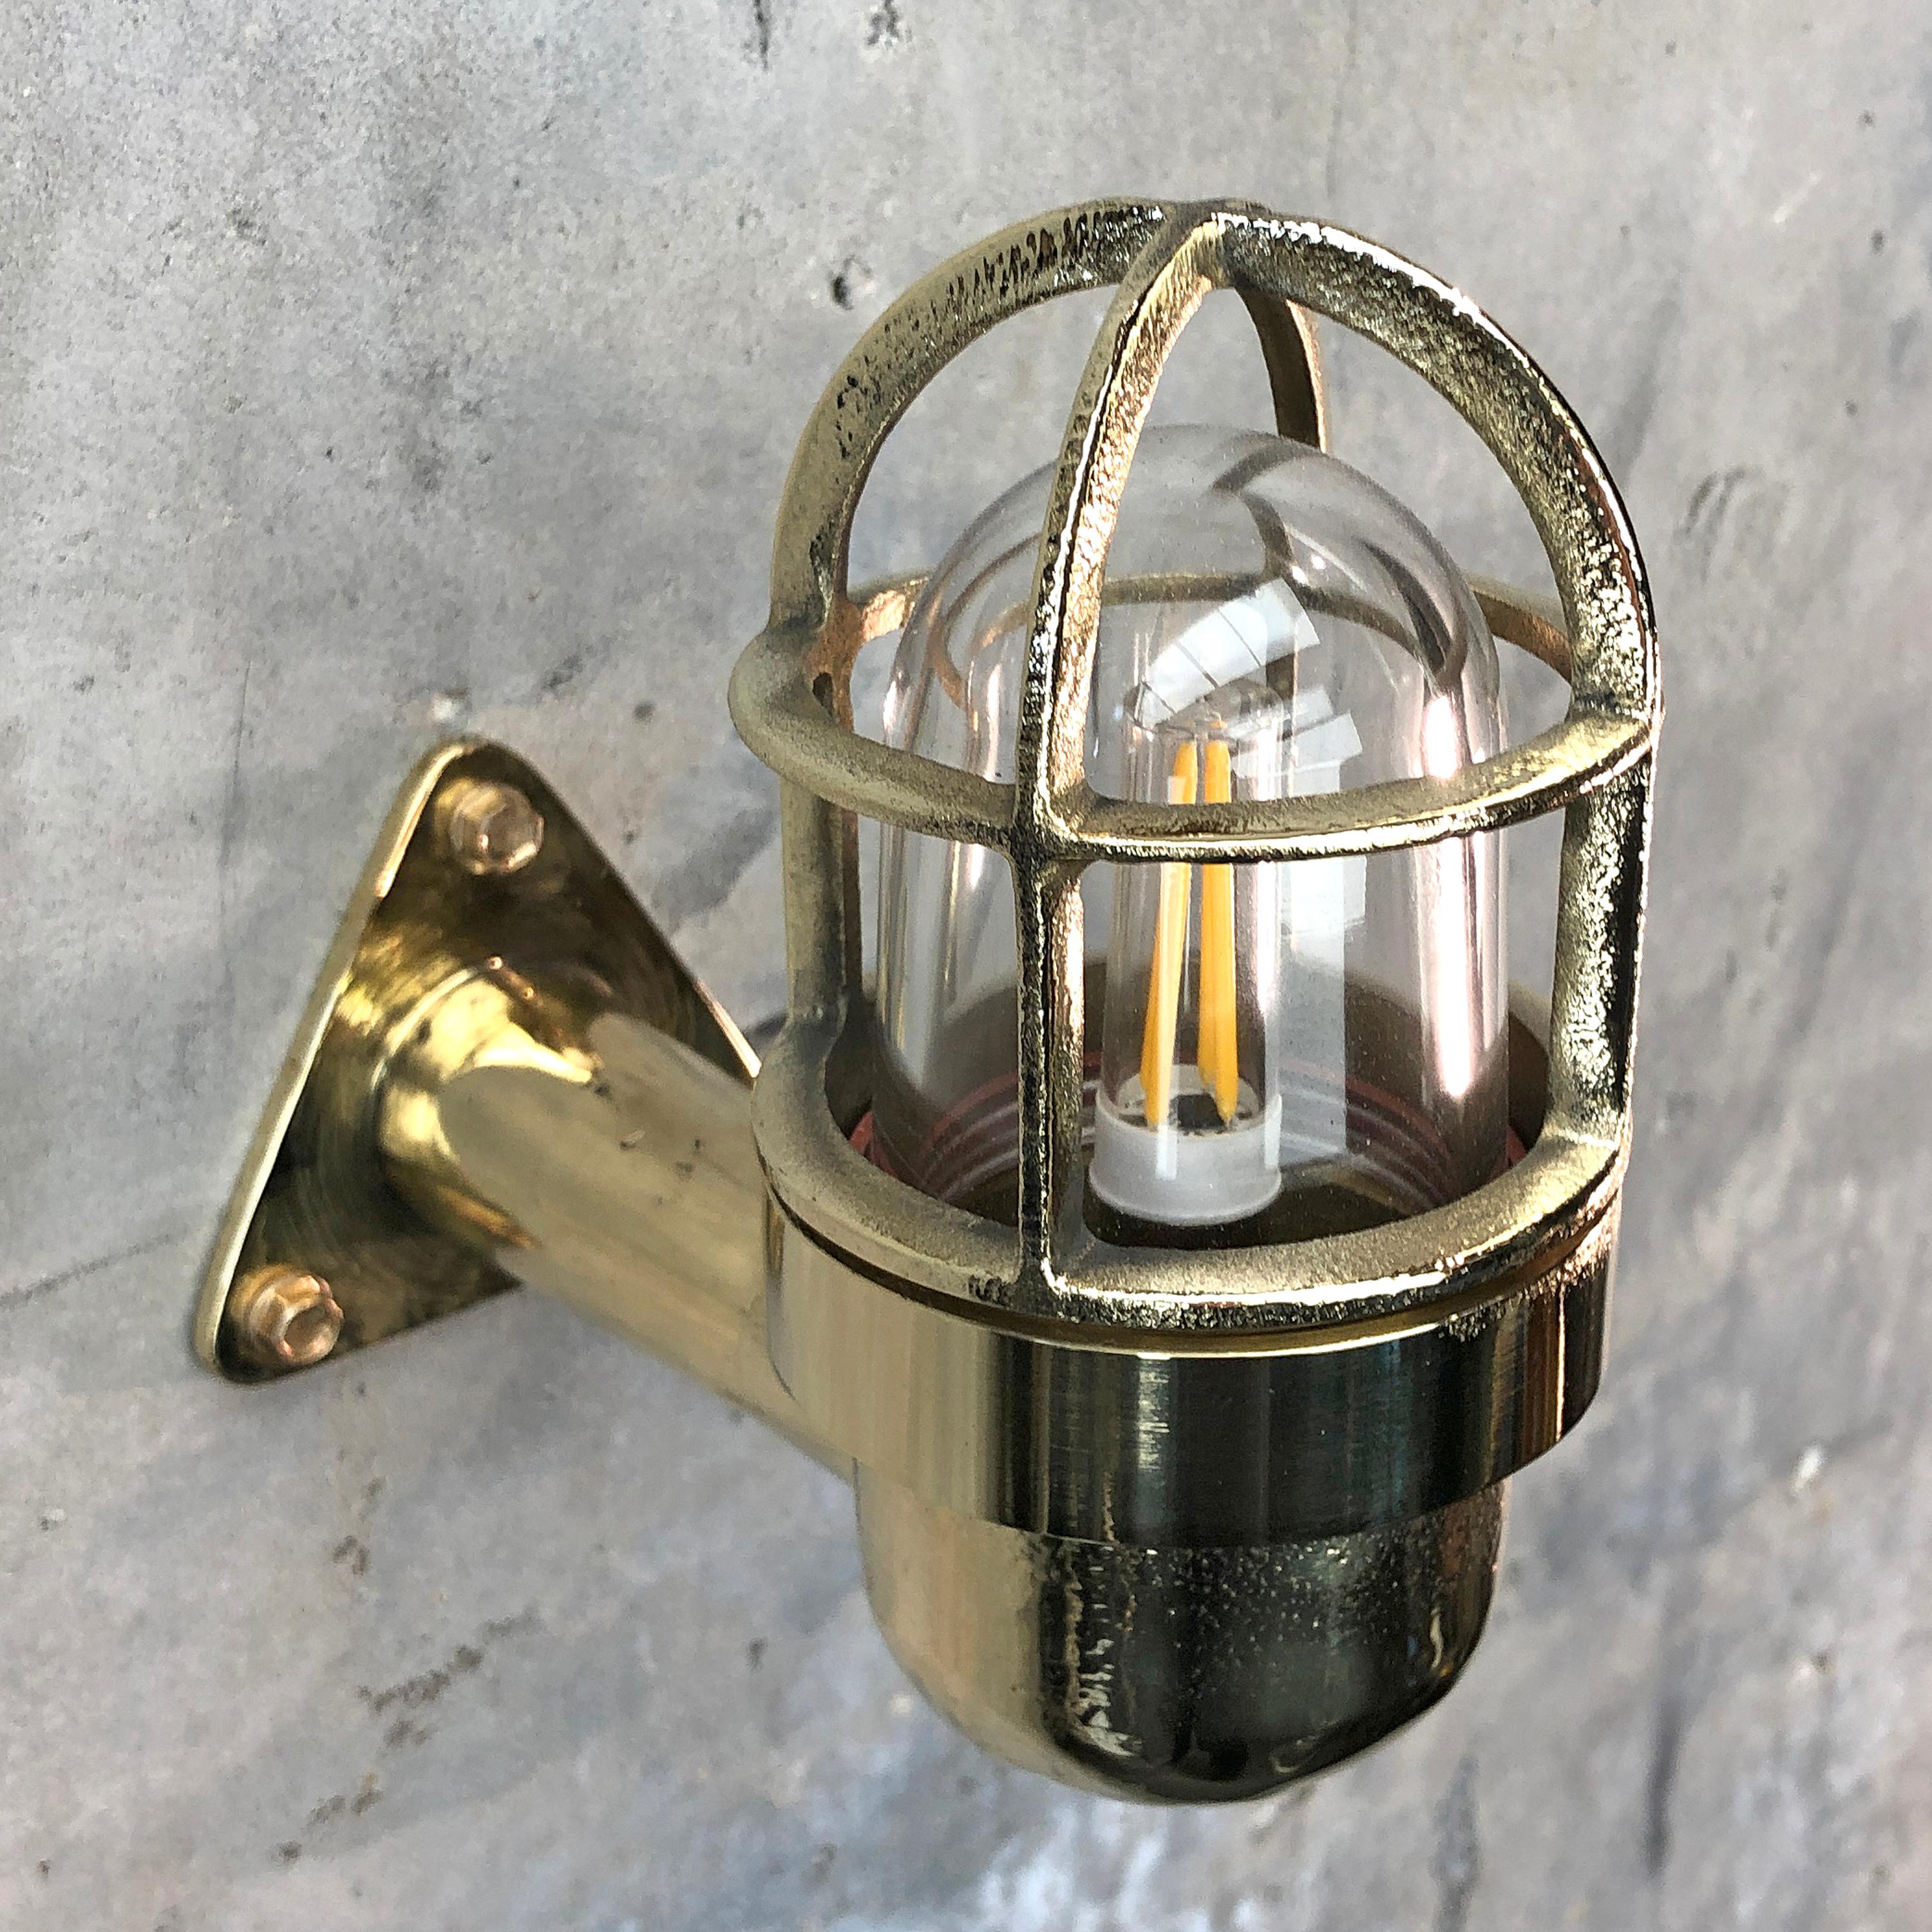 Pressed Late Century Small Industrial Brass Wall Light, Glass Dome, Cage, Edison Bulb